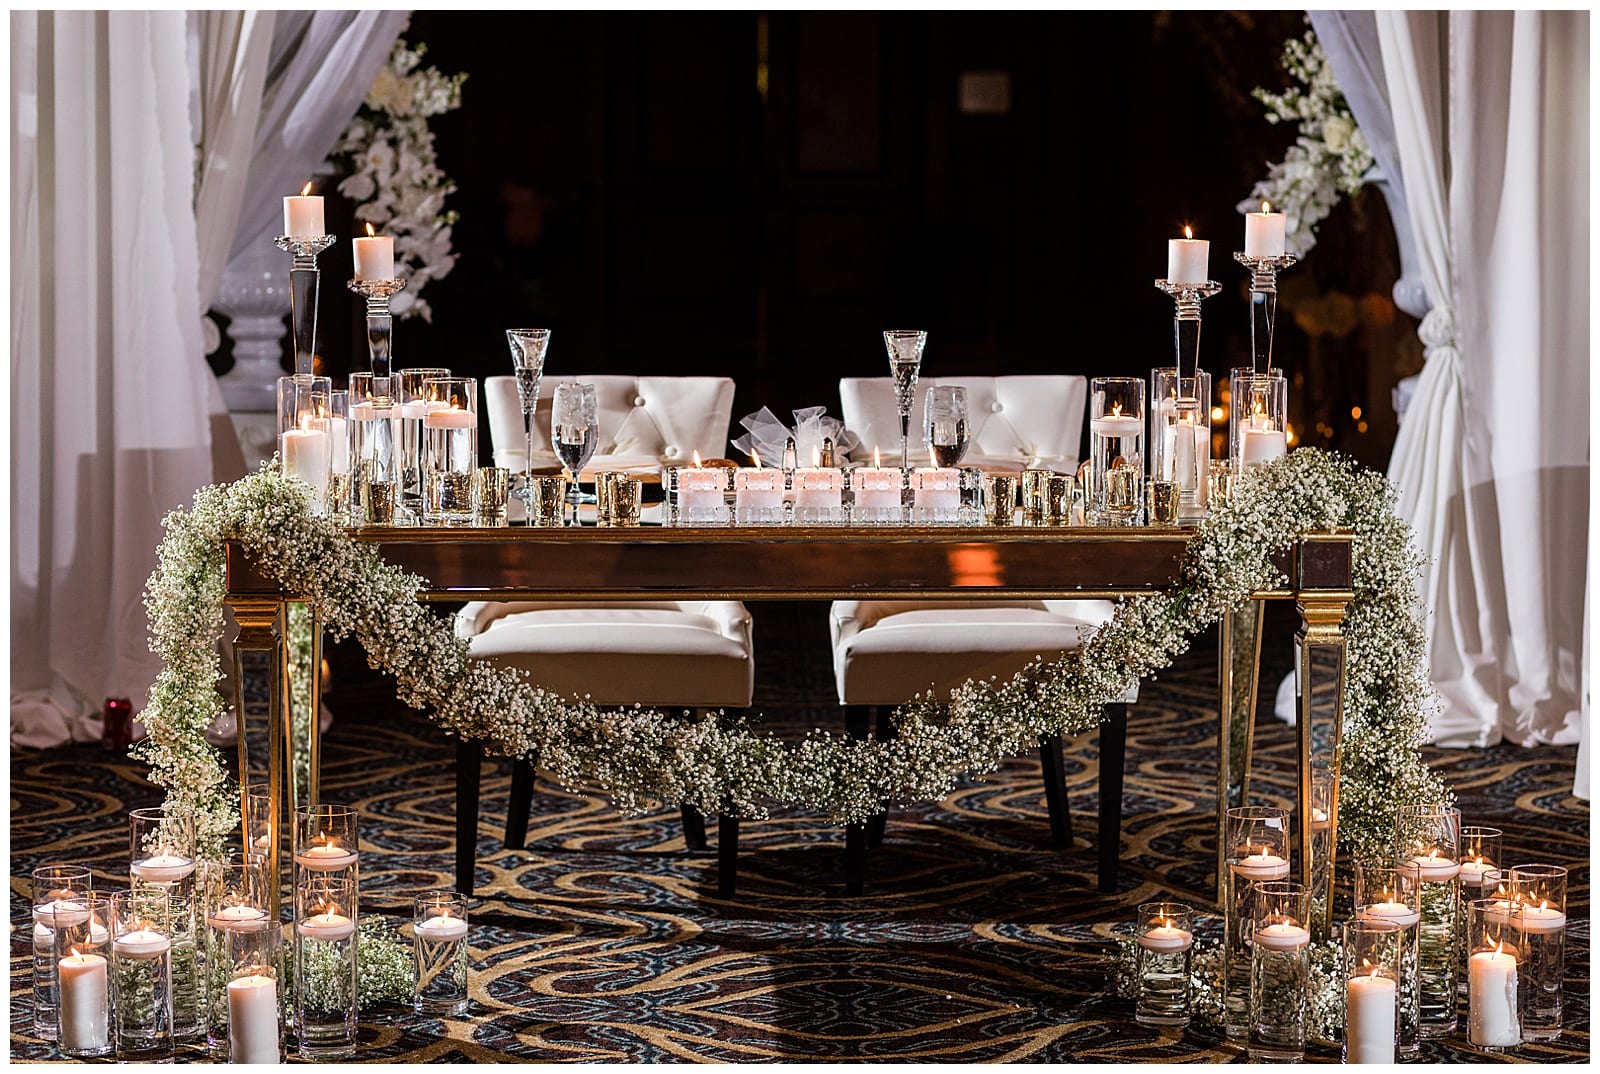 Bride and groom sweetheart table with babies breath table runner and multi-tiered candles at Crystal Tea Room wedding reception